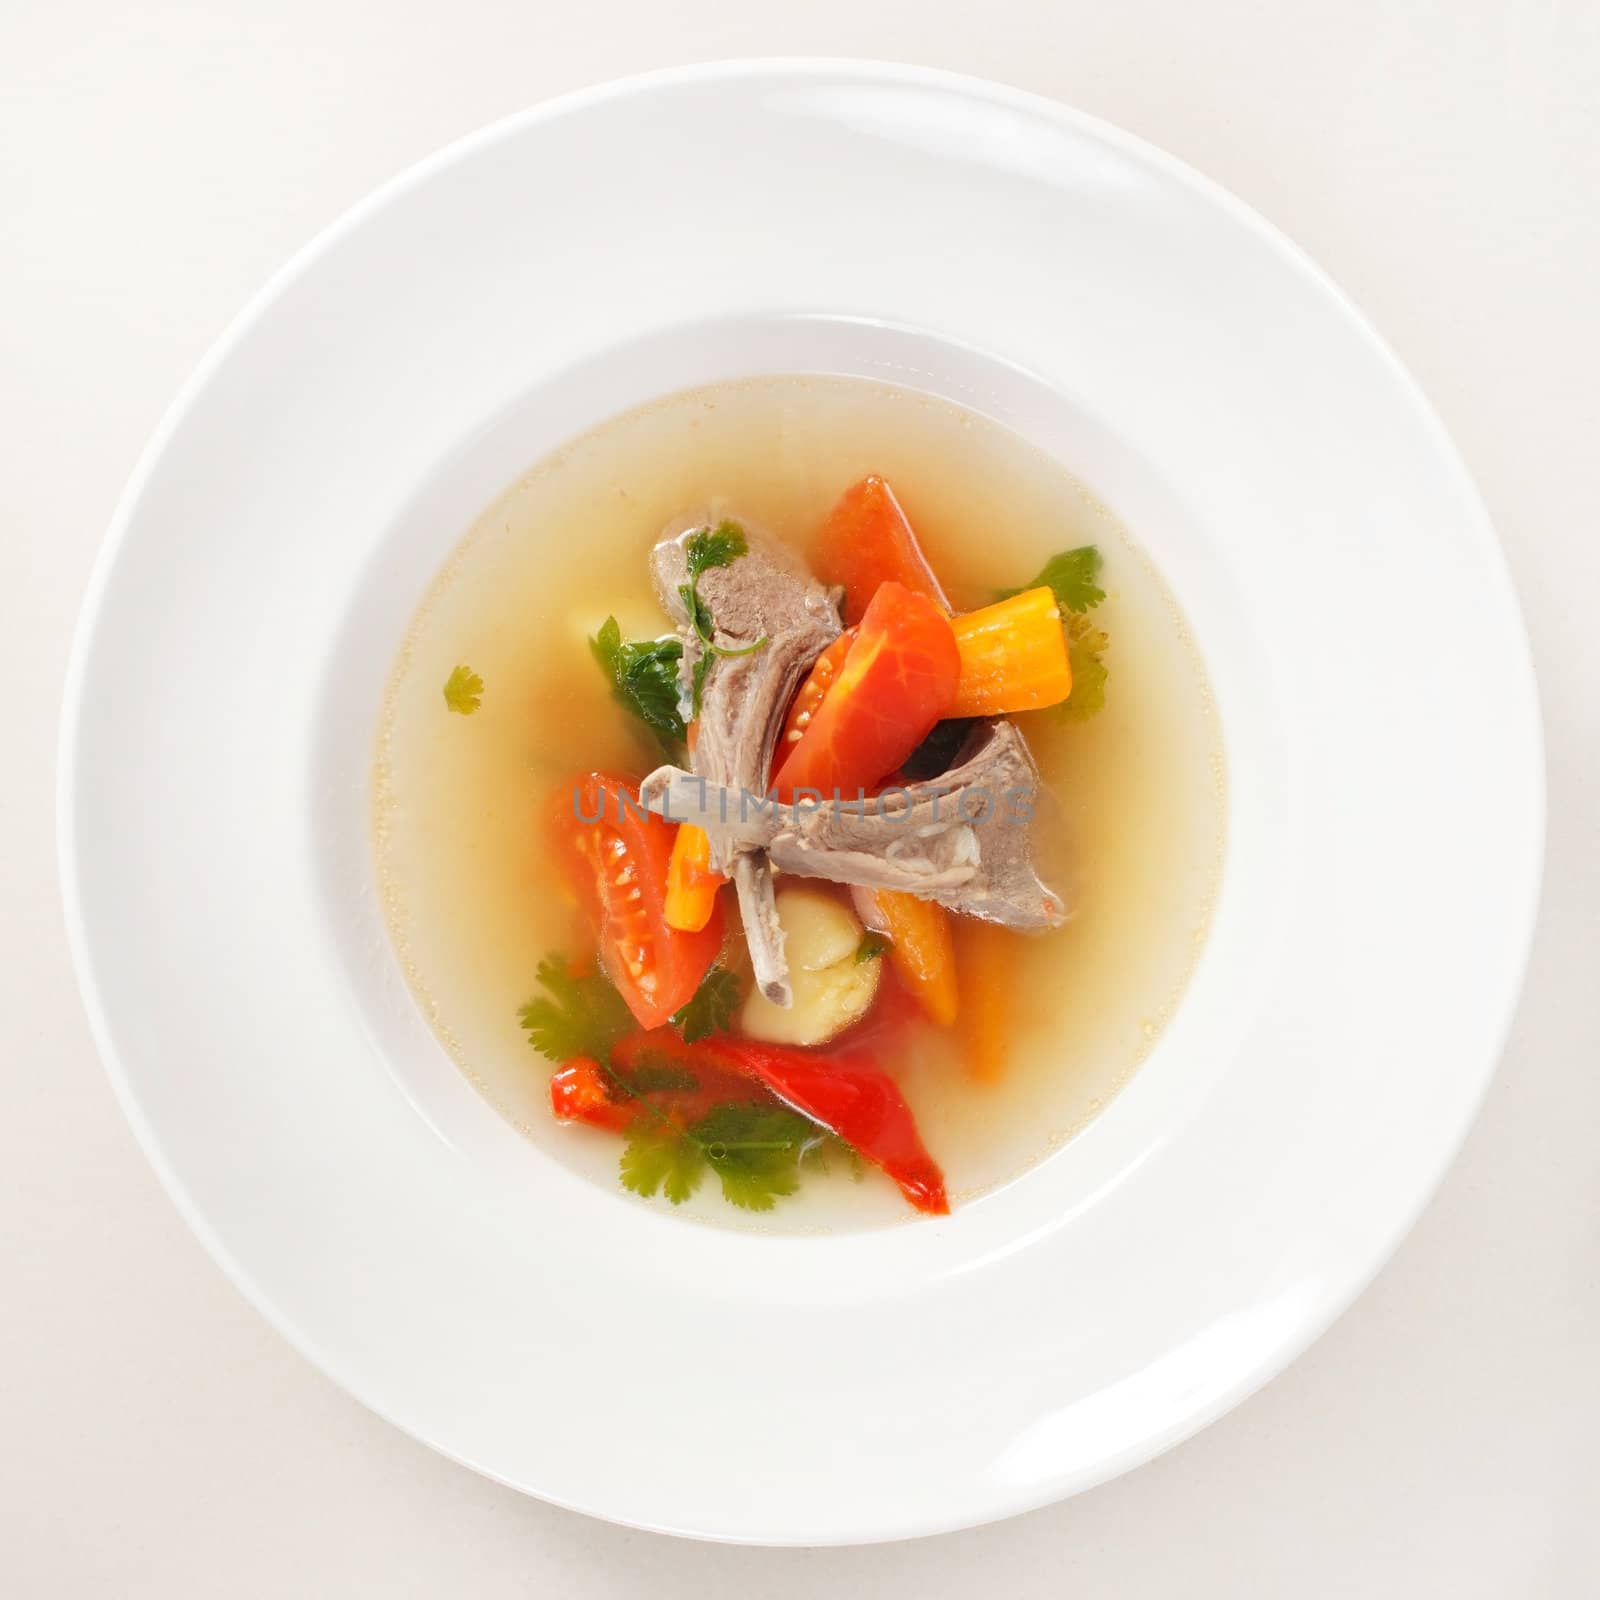 vegetable soup with ribs by shebeko